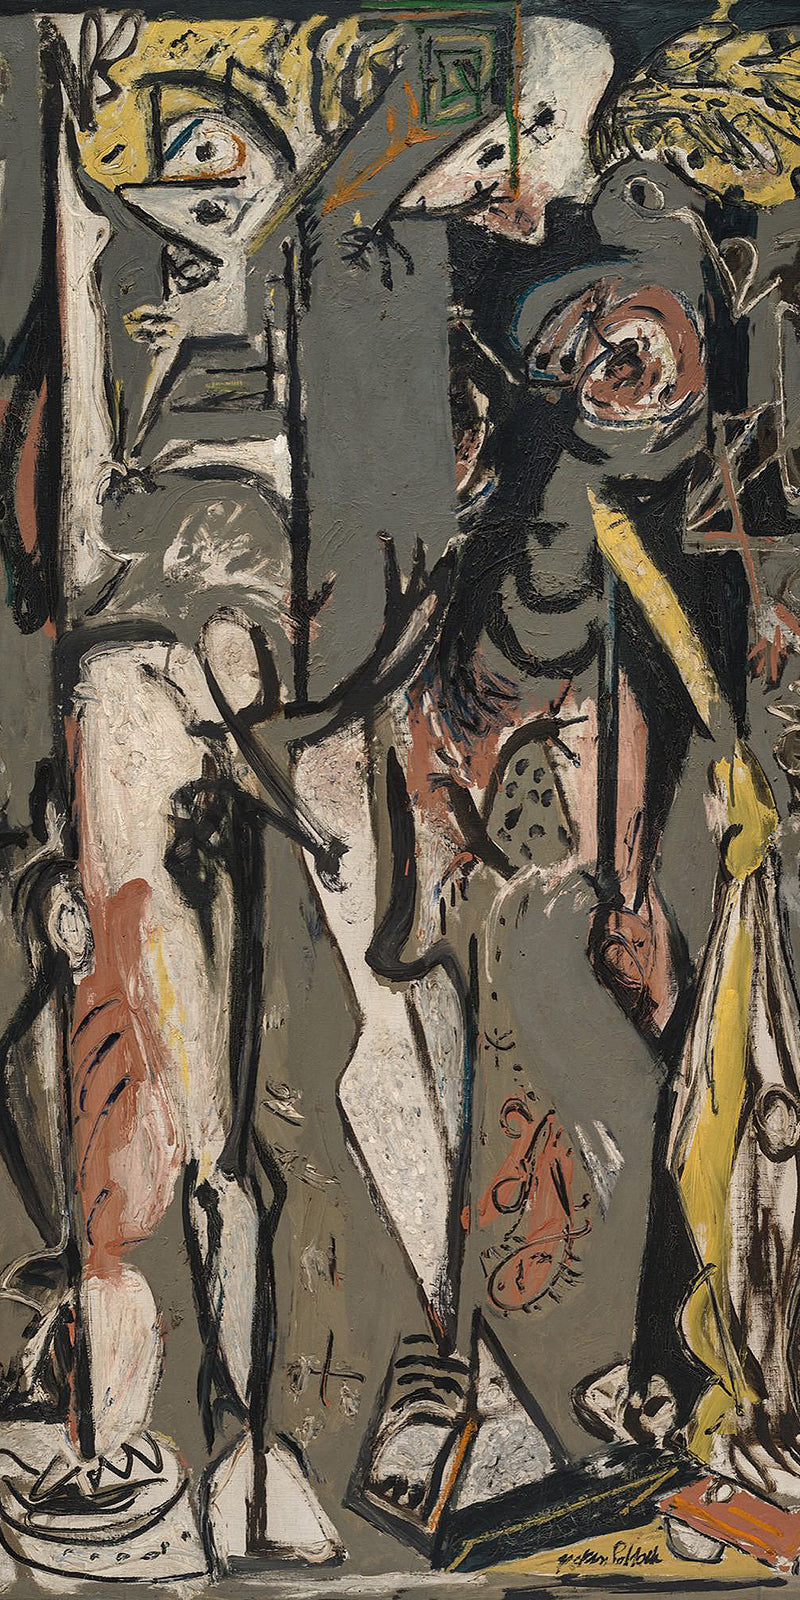 Two, by Jackson Pollock